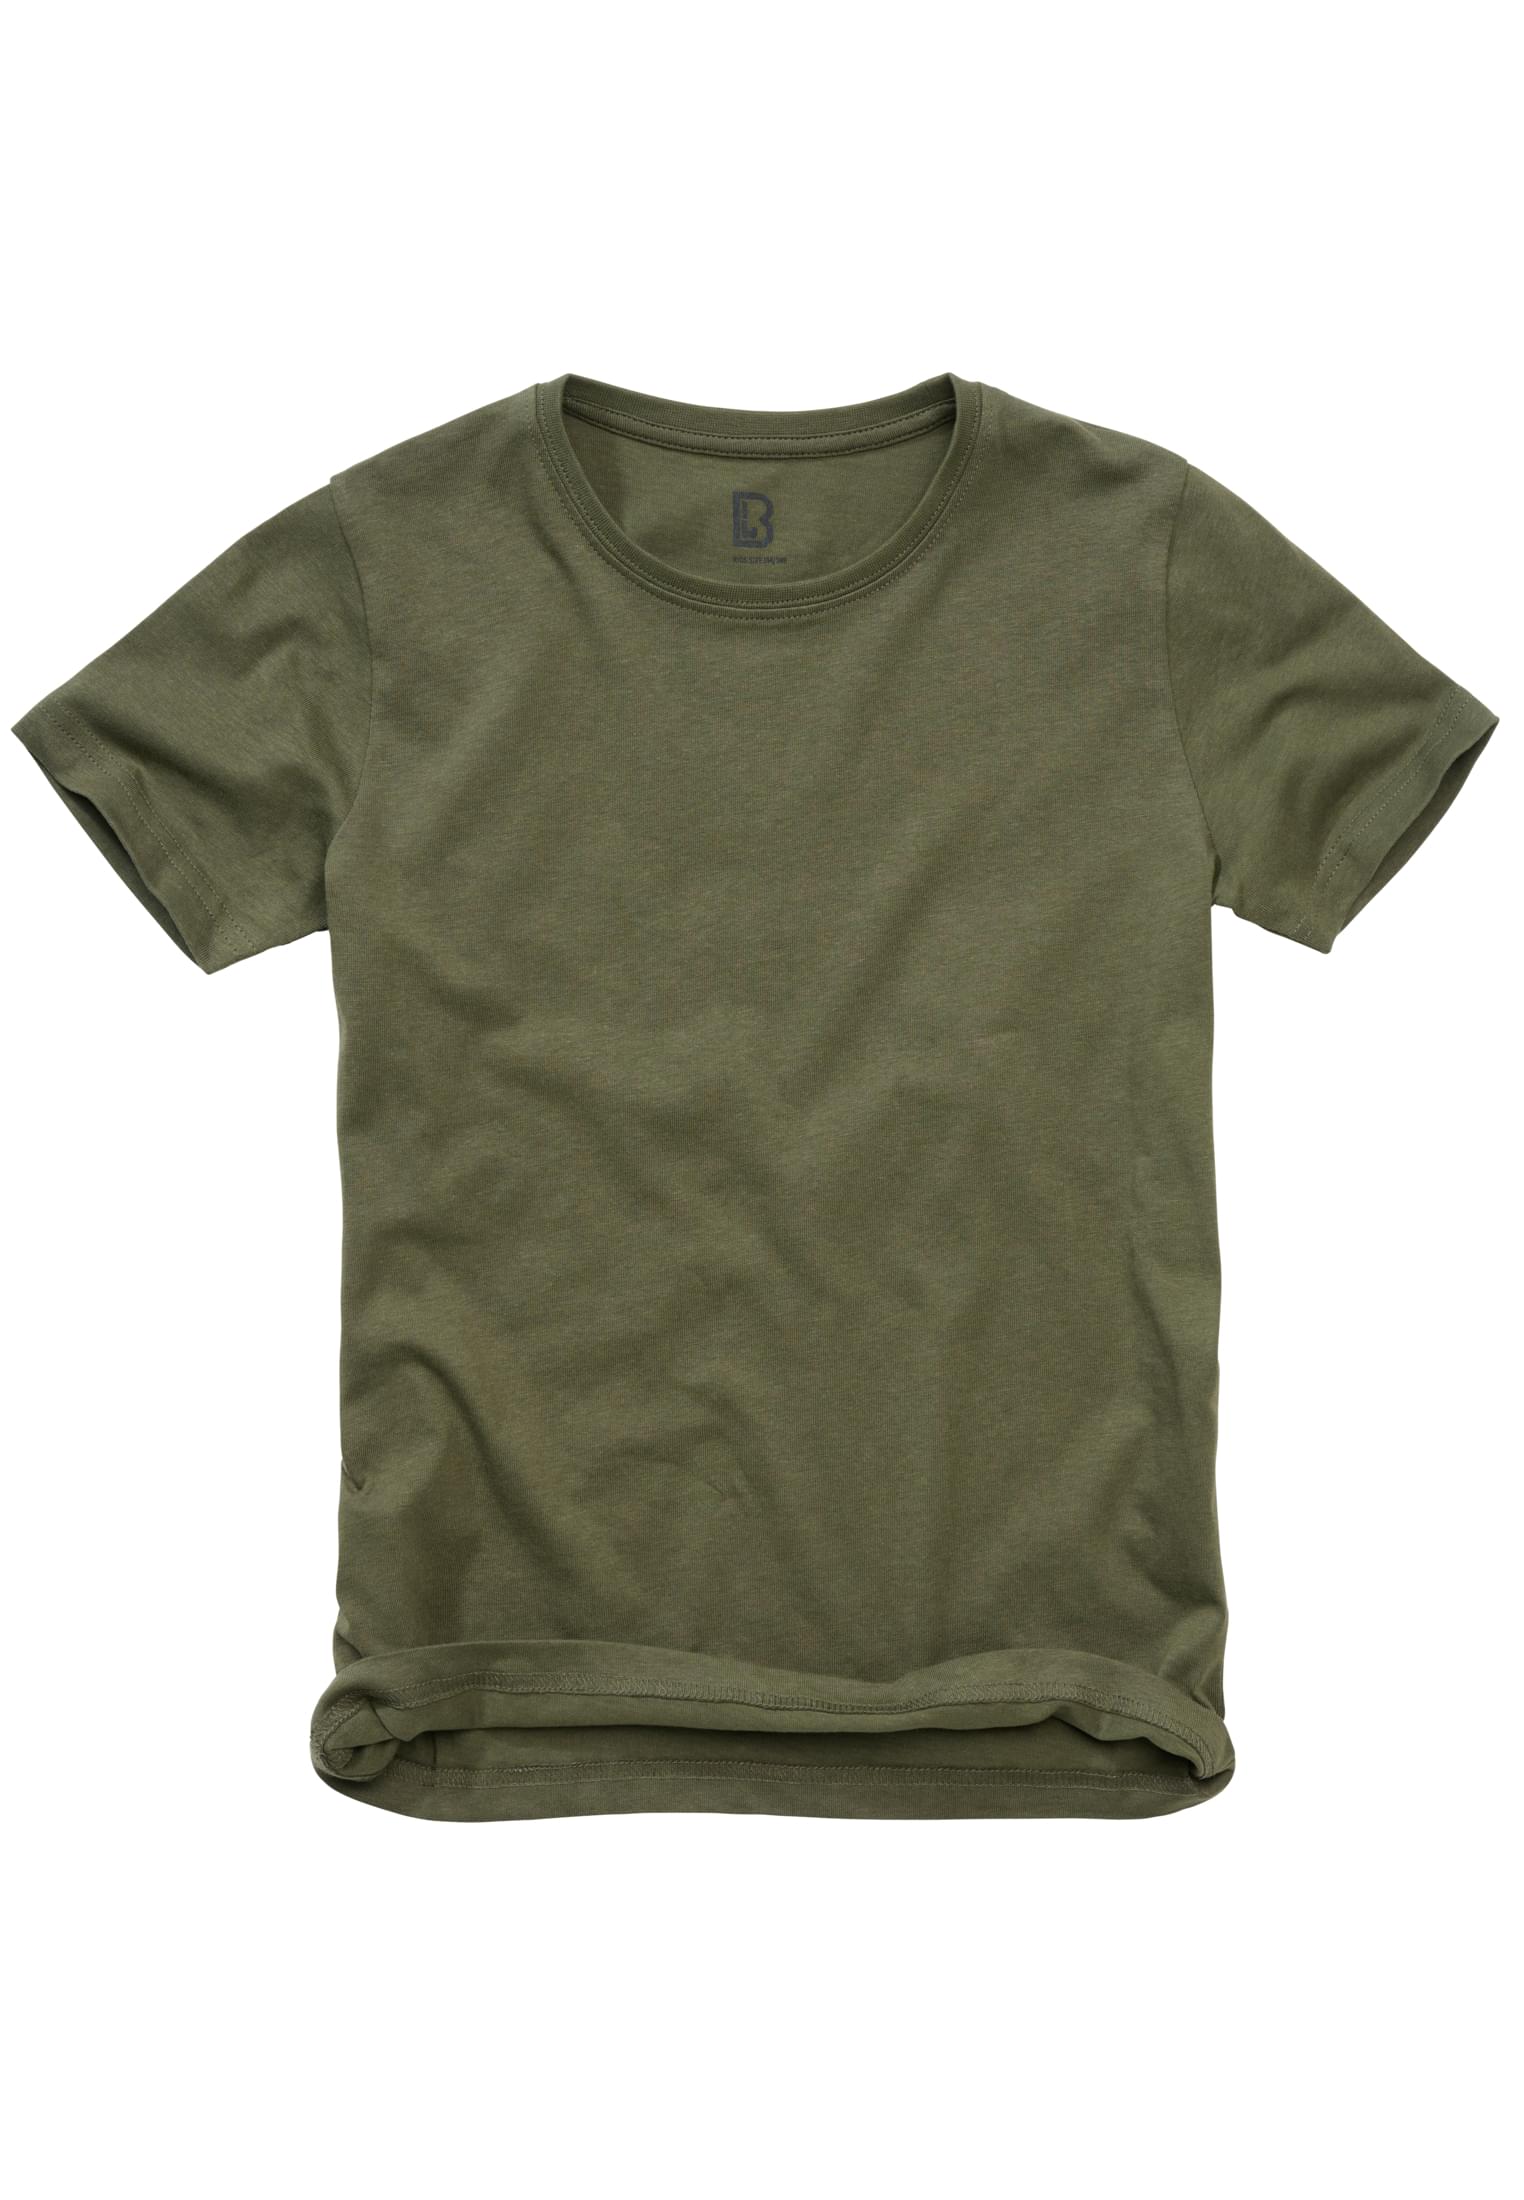 T-Shirts Kids T-Shirt in Farbe olive